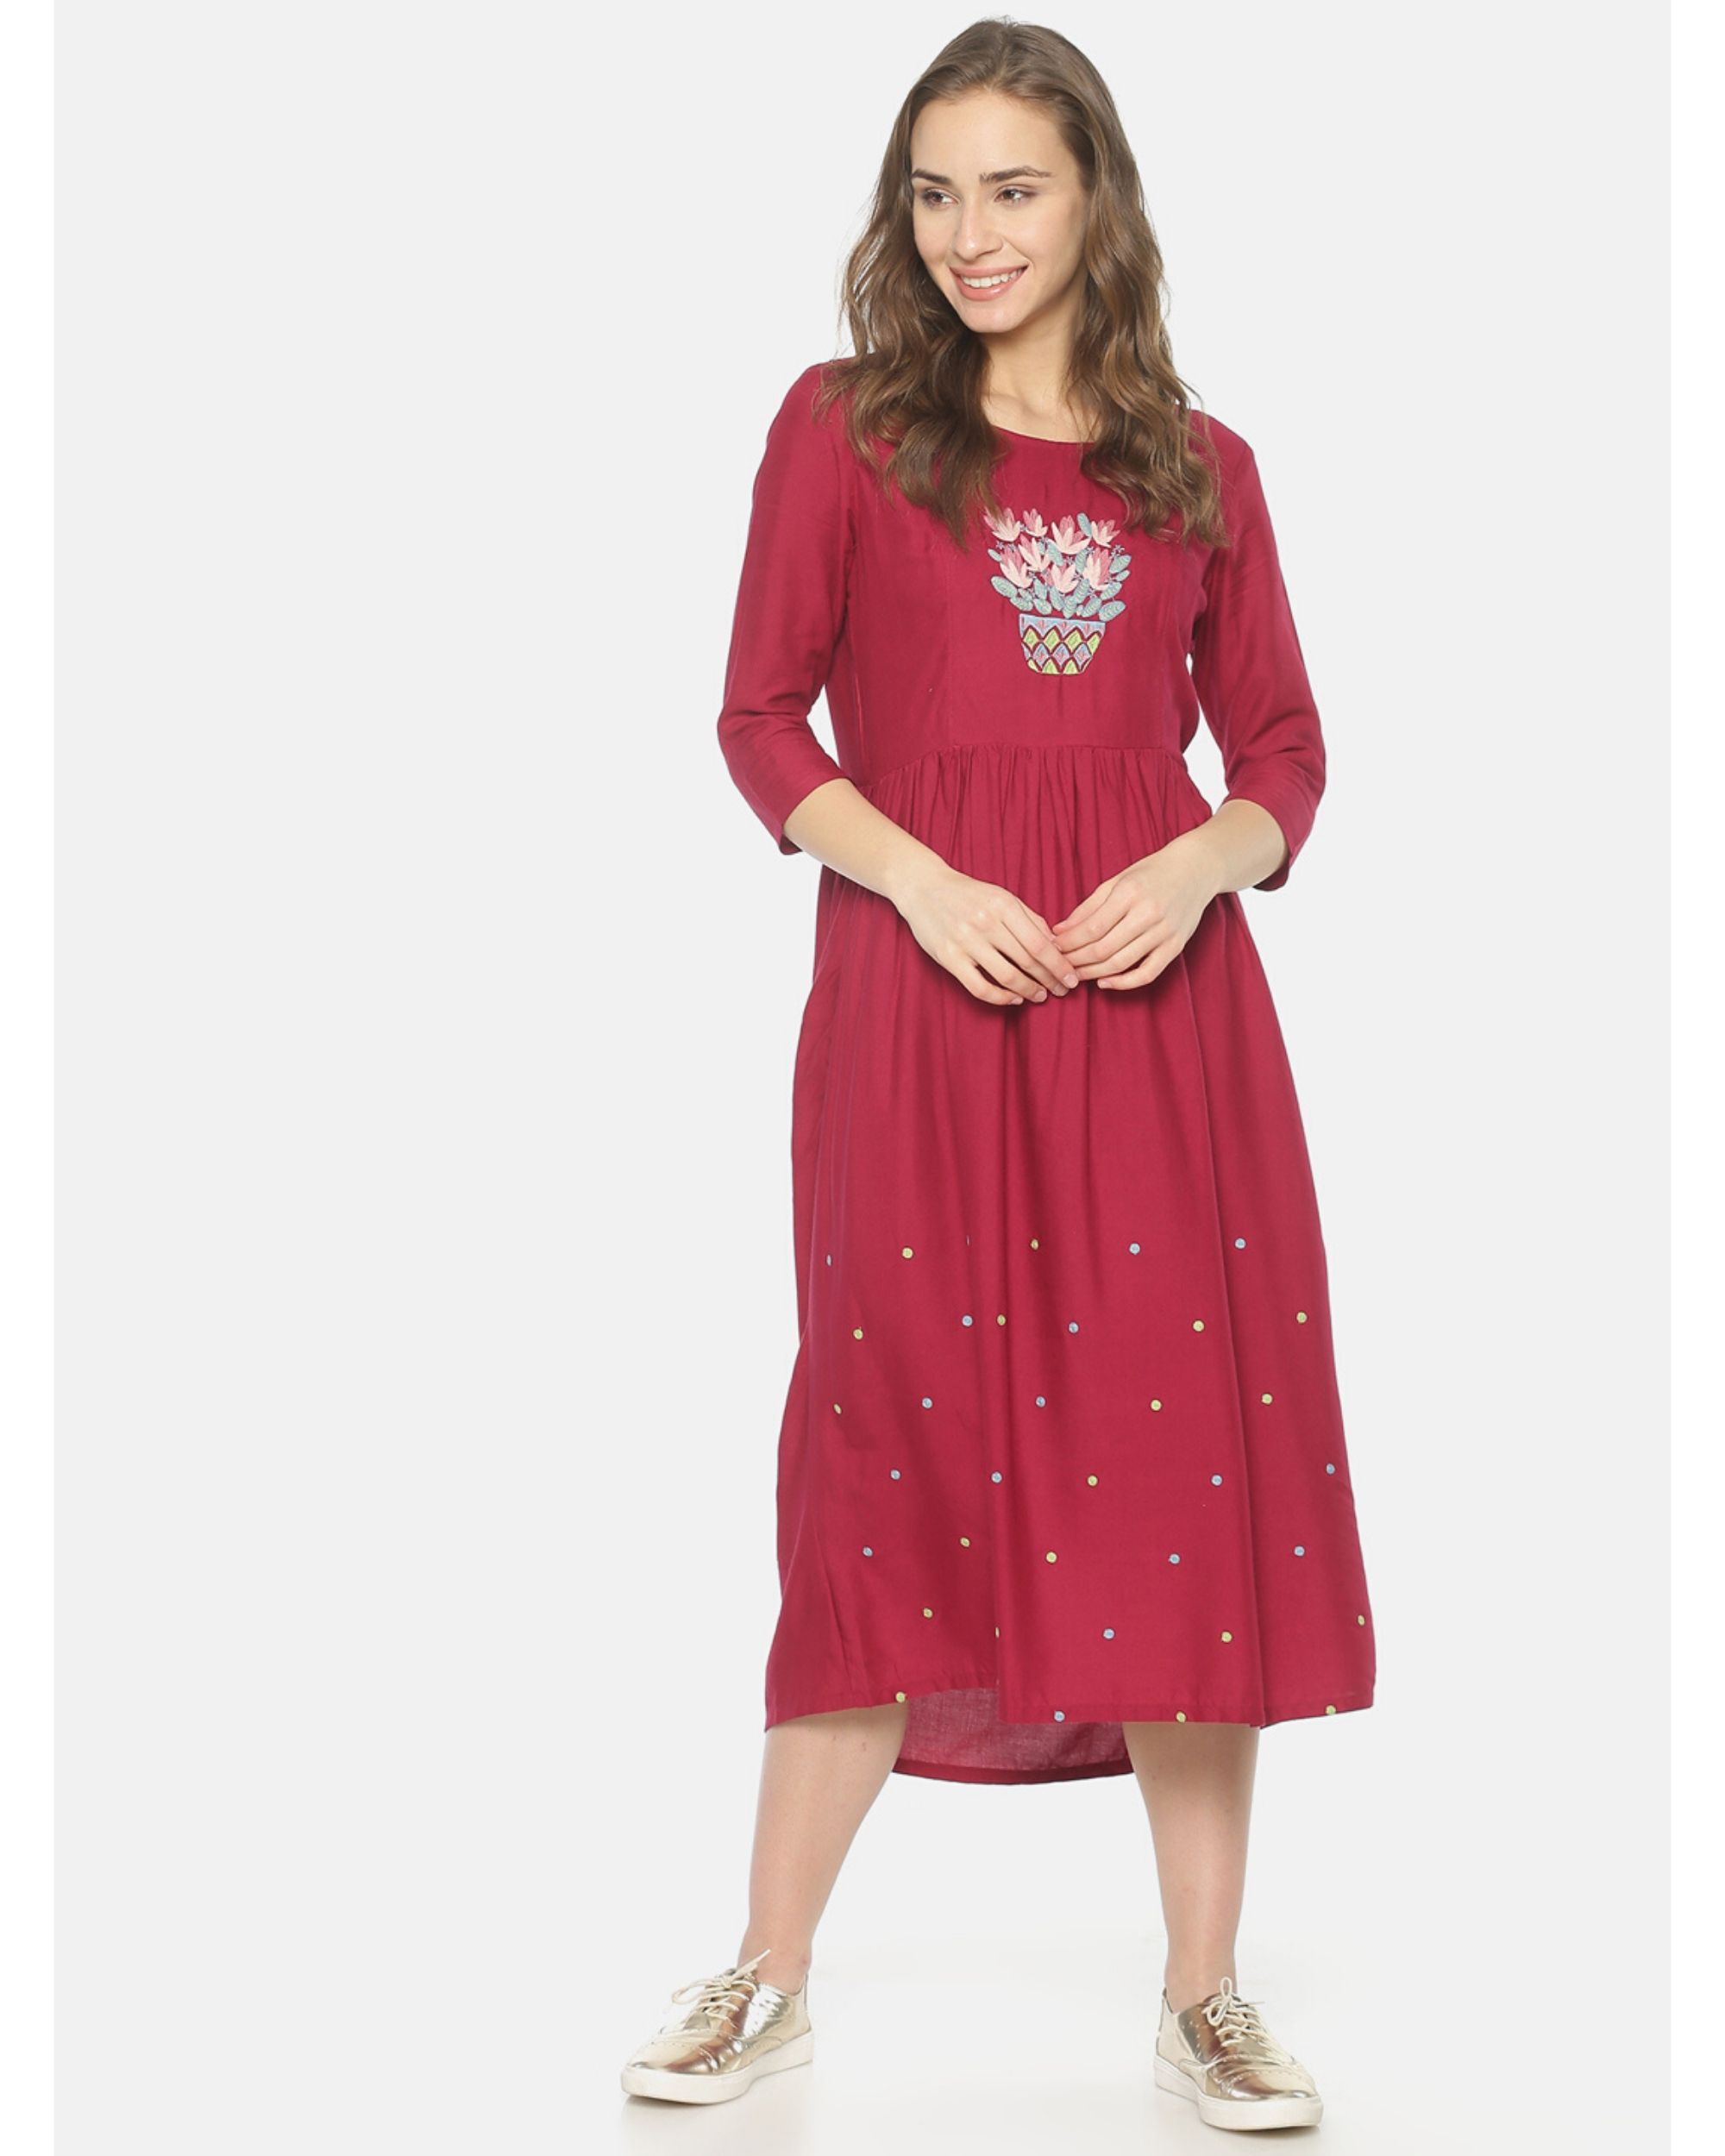 Maroon embroidered yoke dress by UNTUNG | The Secret Label